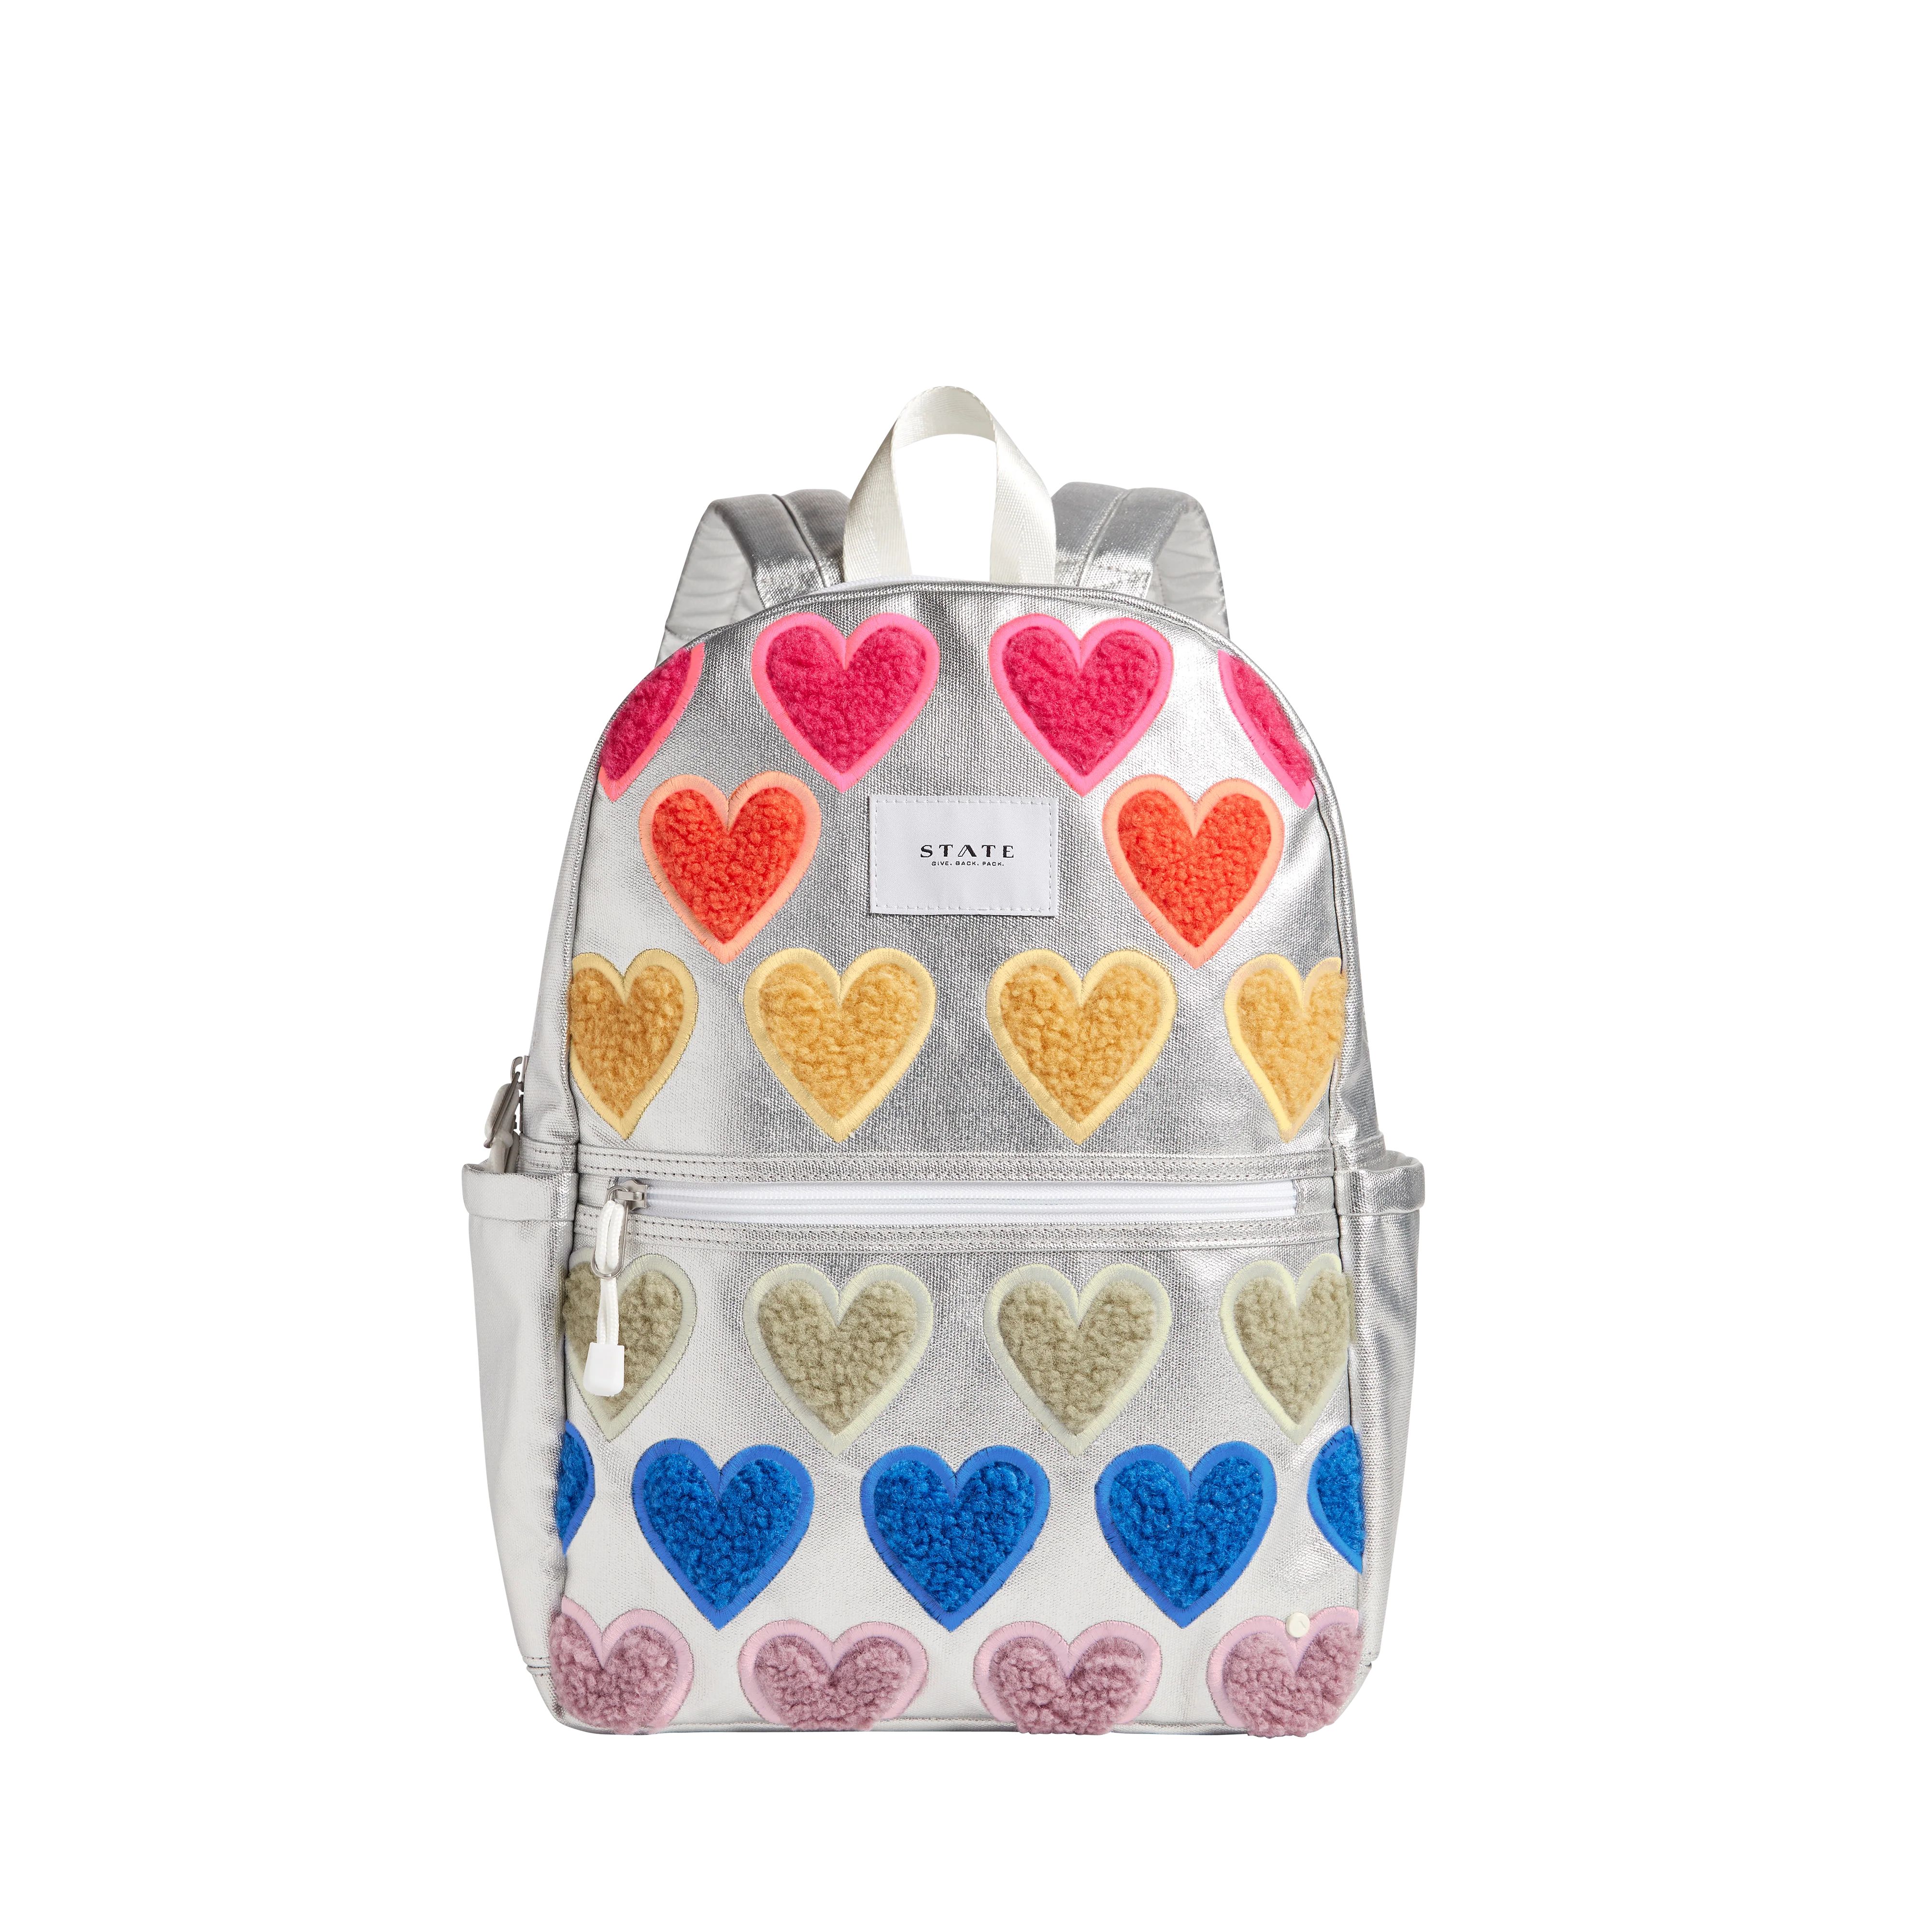 STATE Bags | Kane Kids Backpack Metallic Fuzzy Hearts | STATE Bags